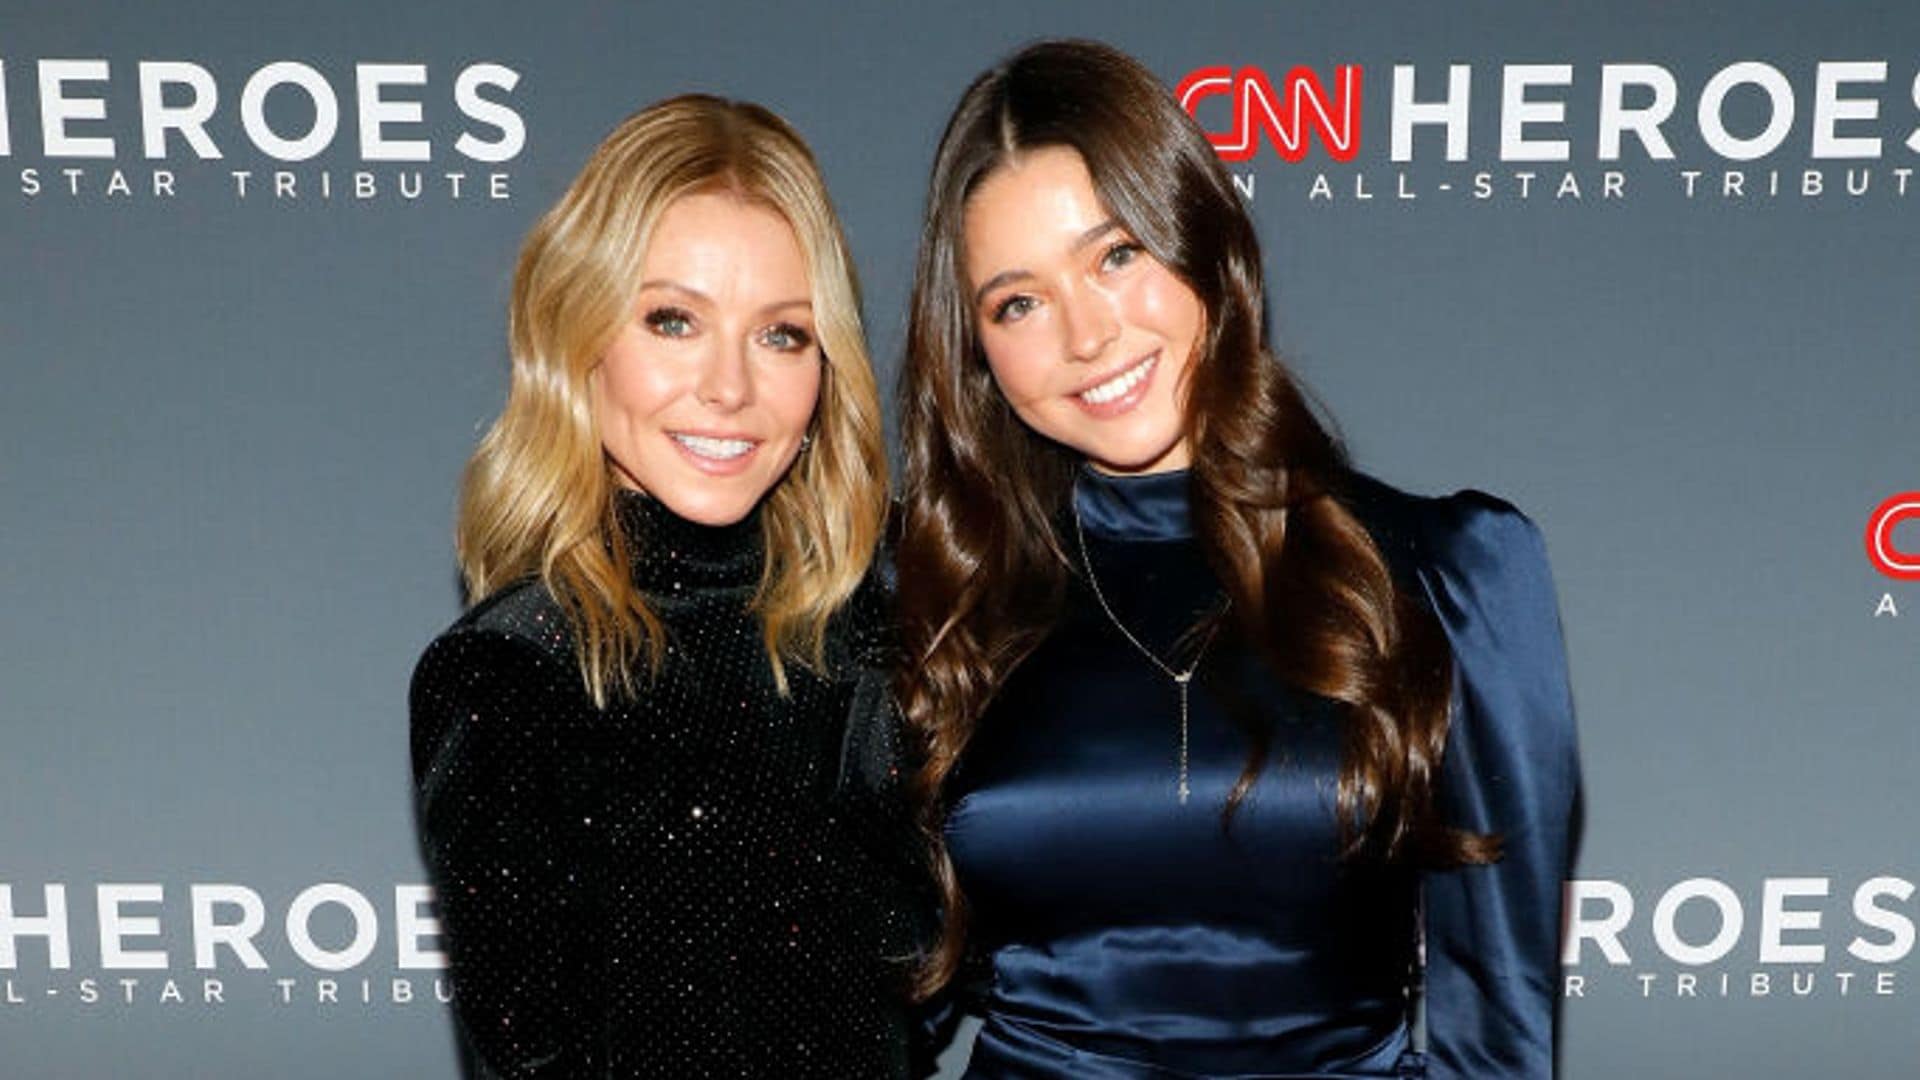 Lola Consuelos, Kelly Ripa's daughter, teases debut album 'The Watcher' coming in August